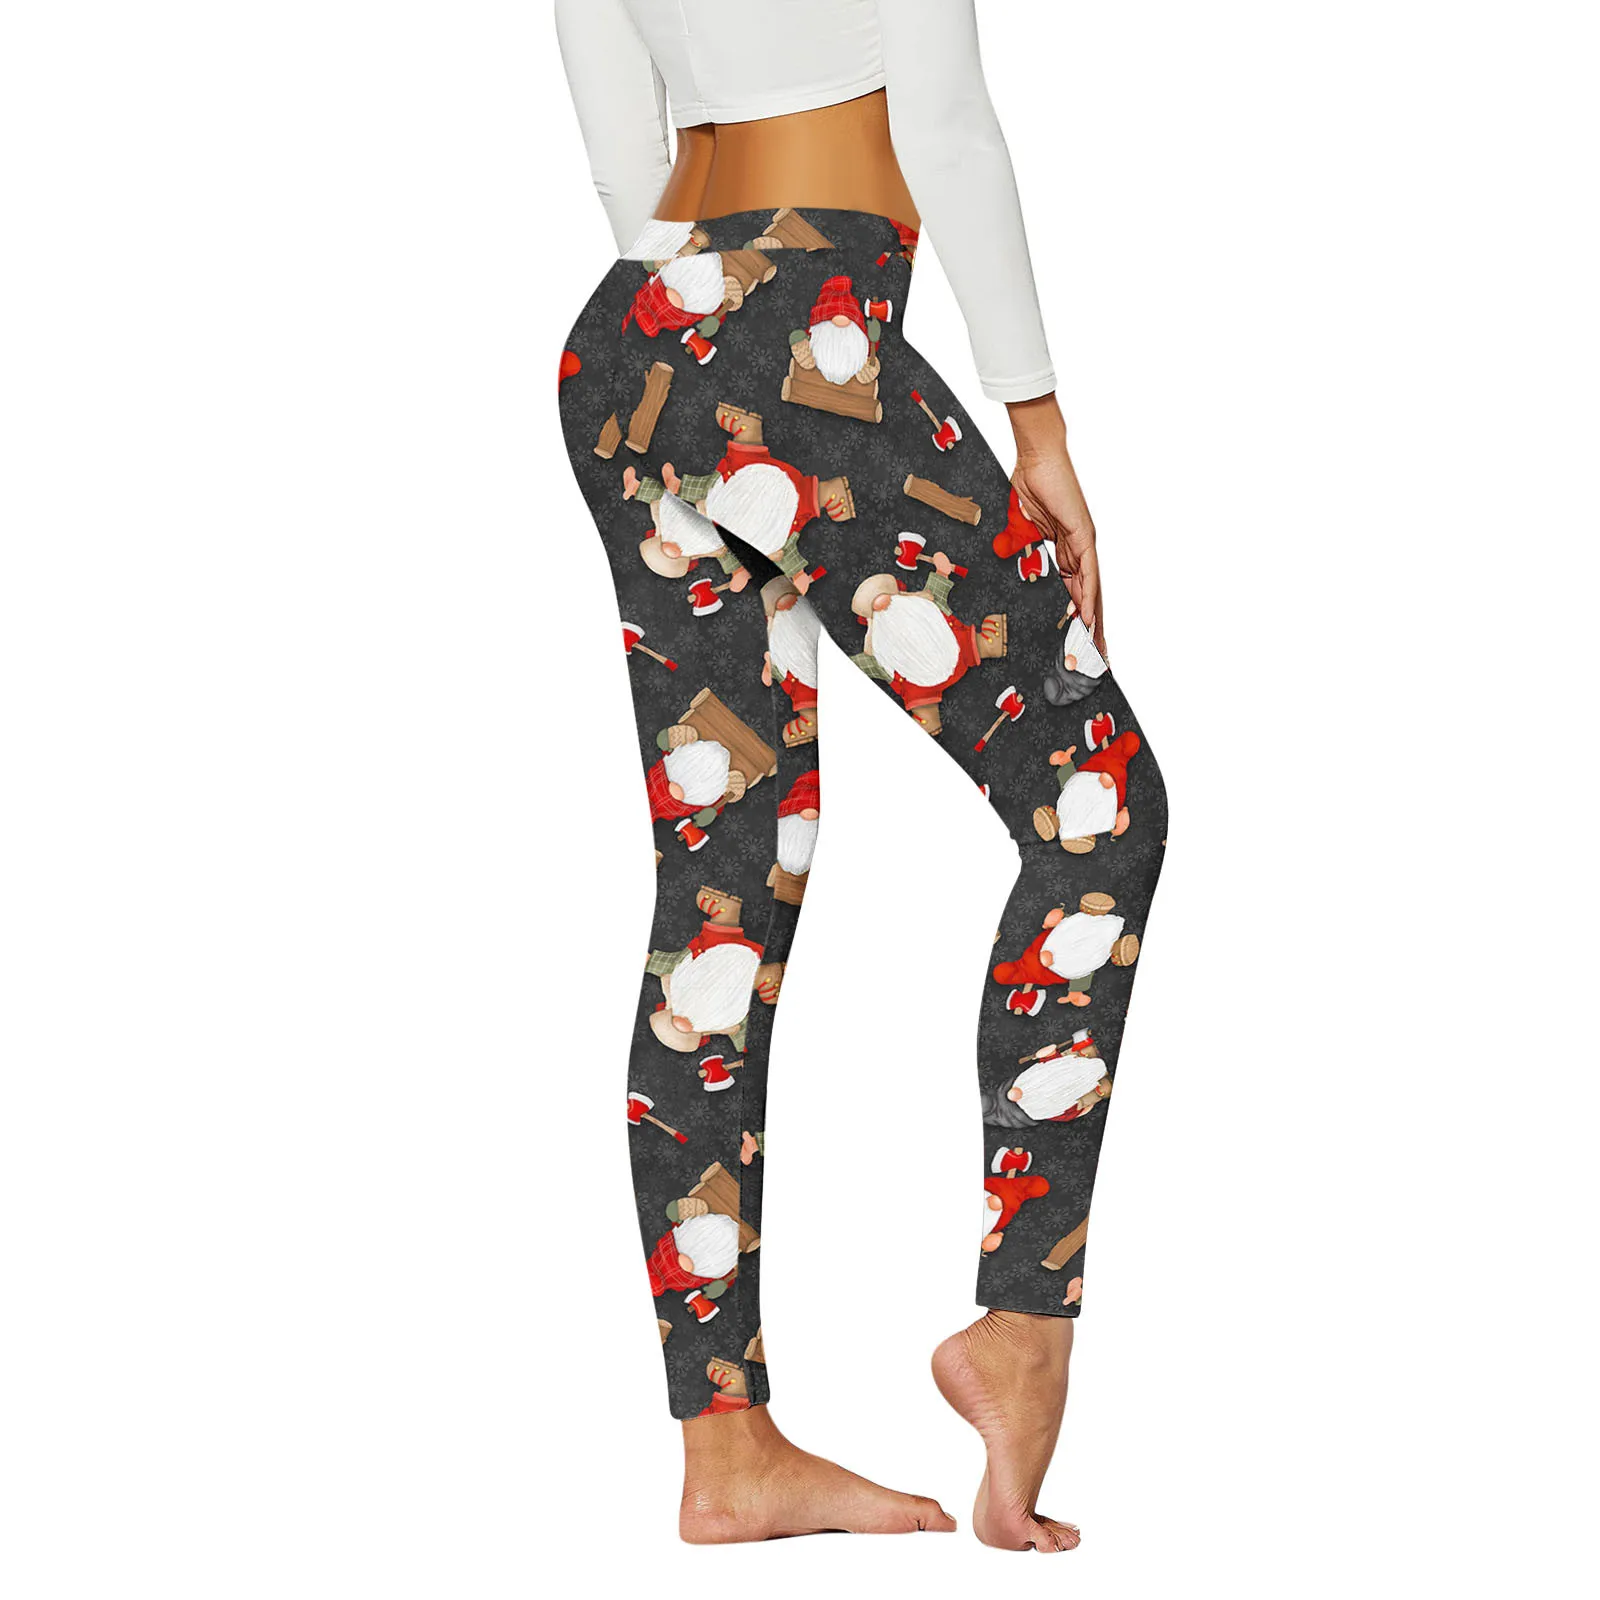 Suitable Leggings For Women Casual Christmas Pattern Stretch High